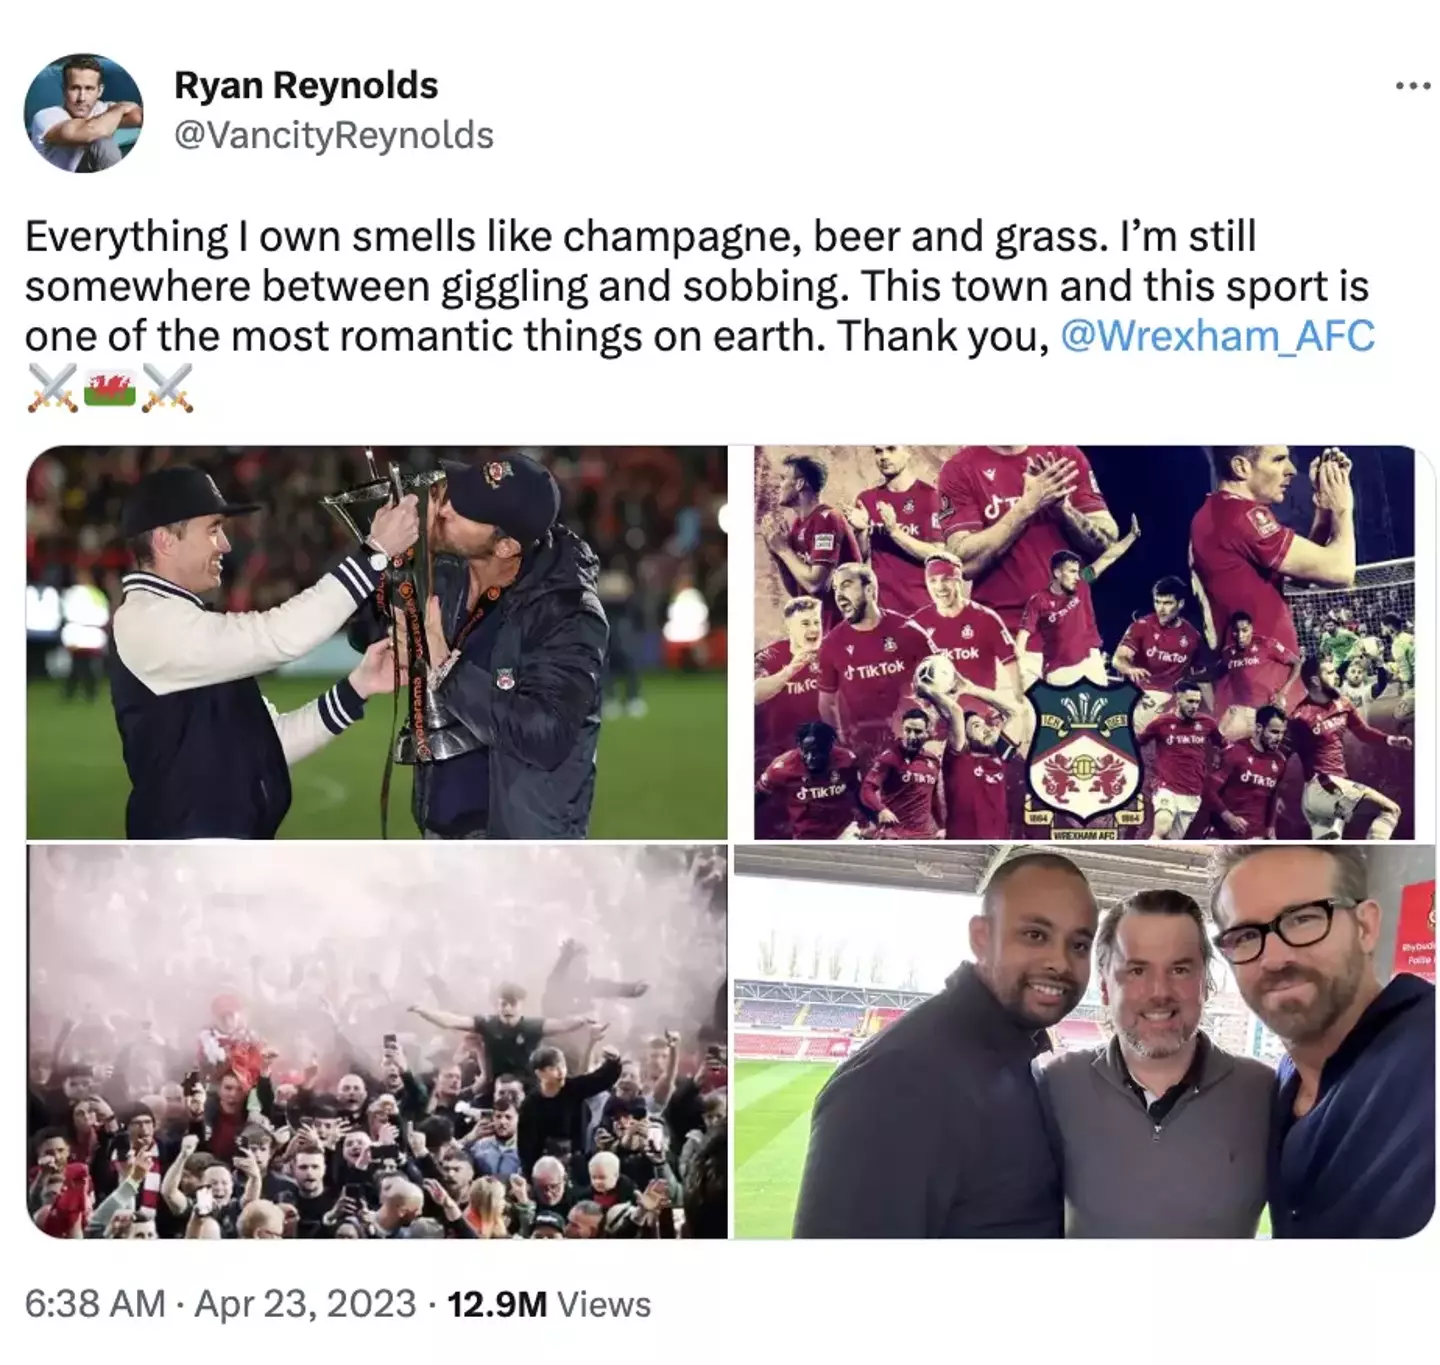 Ryan Reynolds was clearly made up with the victory.